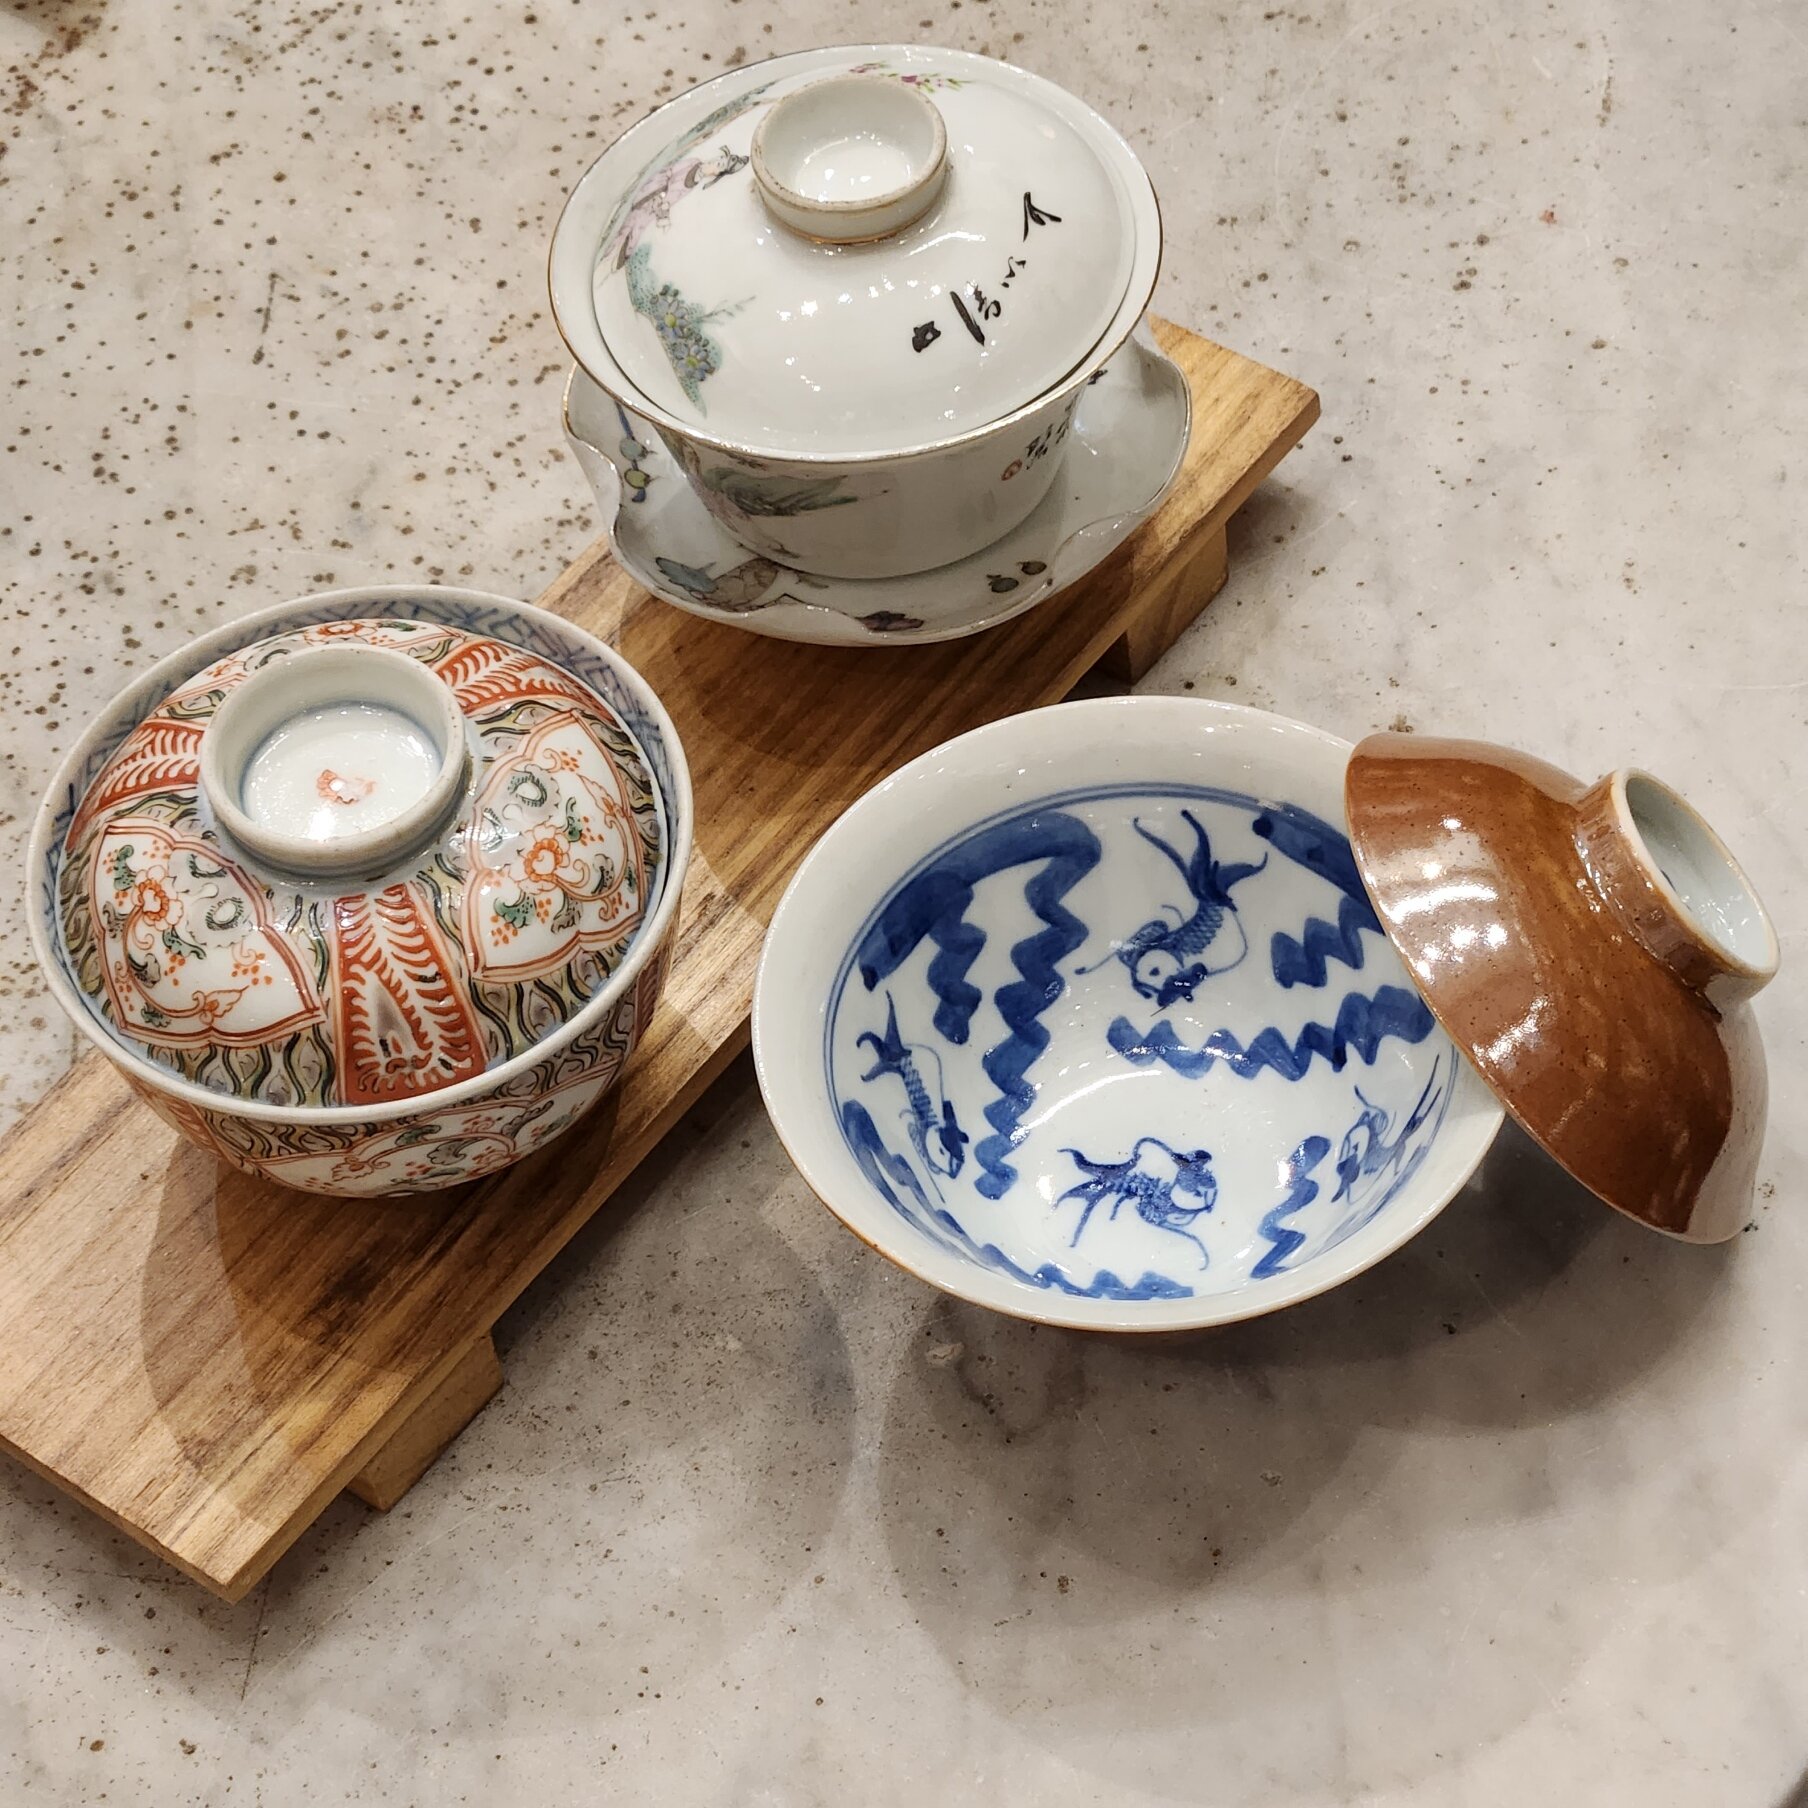 3 lidded bowl/cup in different styles, can you guess which is made for which market?
.
.
.
.
.
.
.
#interior #homedecor #decor #kitchen #decoration #japanese #tea #singapore #antique #porcelain #teatime #igsg #antiques #ceramics #kitchendesign #explo